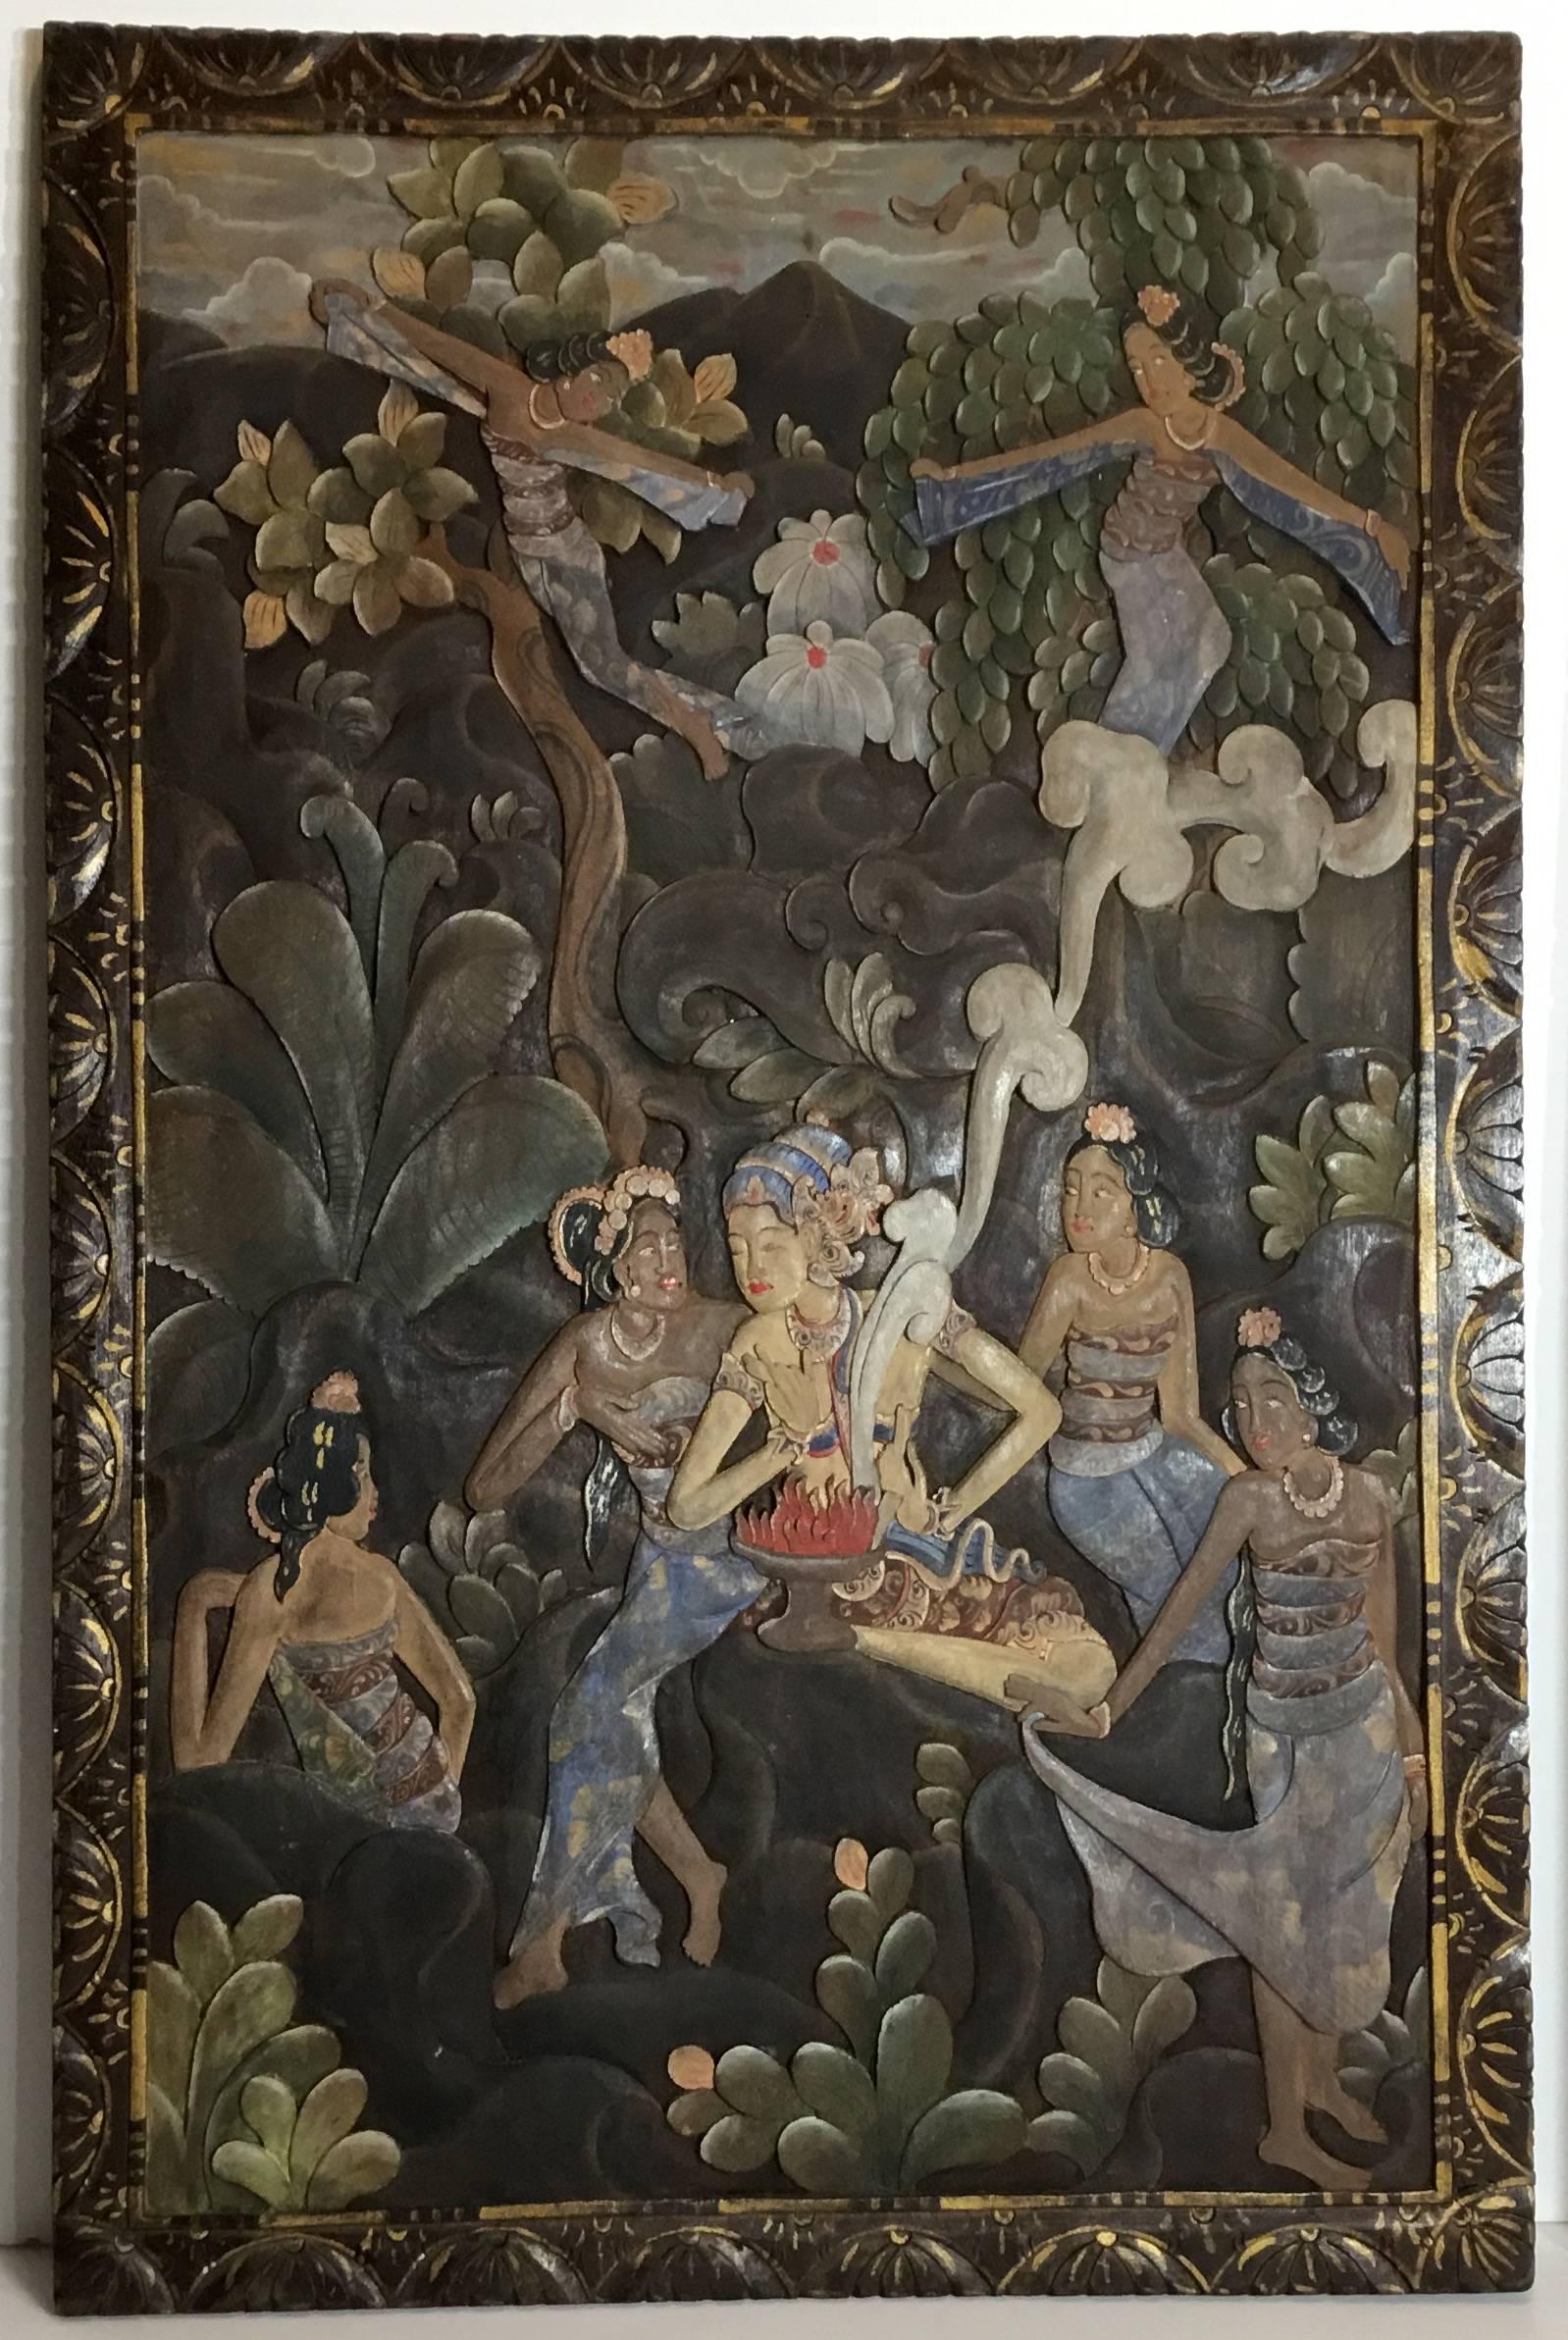 Beautiful Folk Art wood carving from Bali, artfully hand-painted depicting elegant
garden scene, very detailed carving that give the piece depth and beauty.